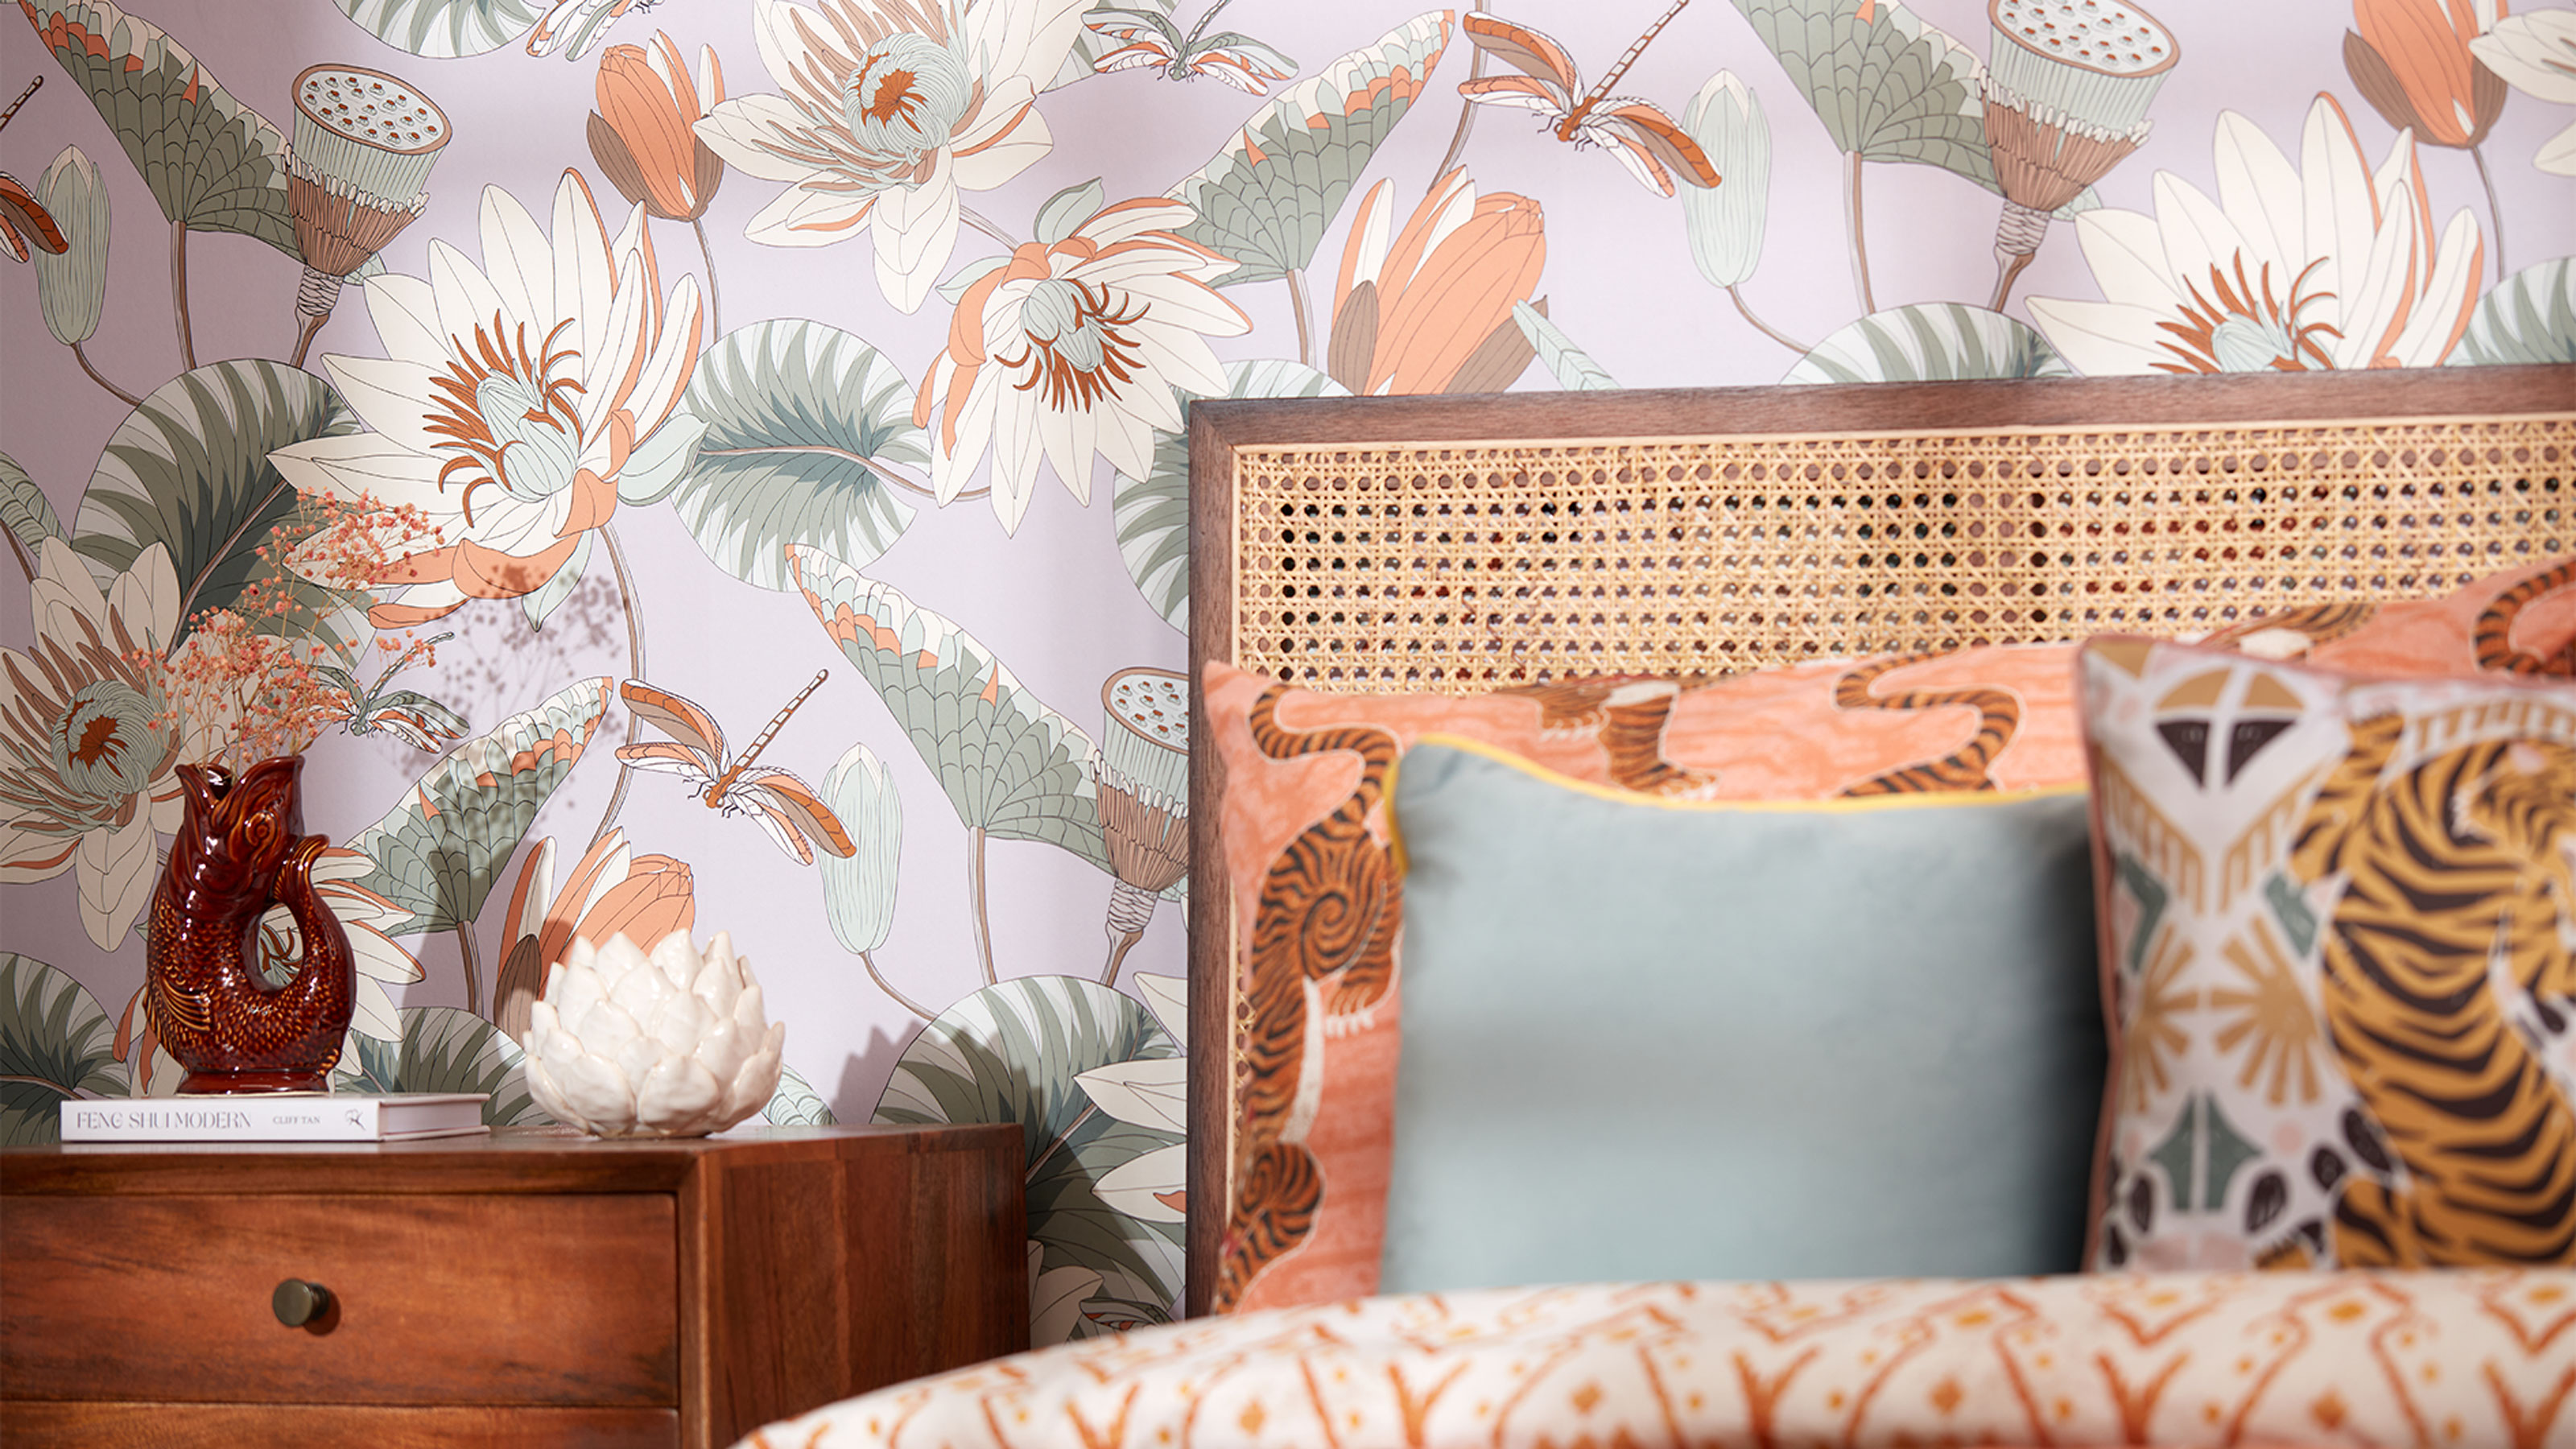 30 Bedroom wallpaper ideas to make a statement | Ideal Home